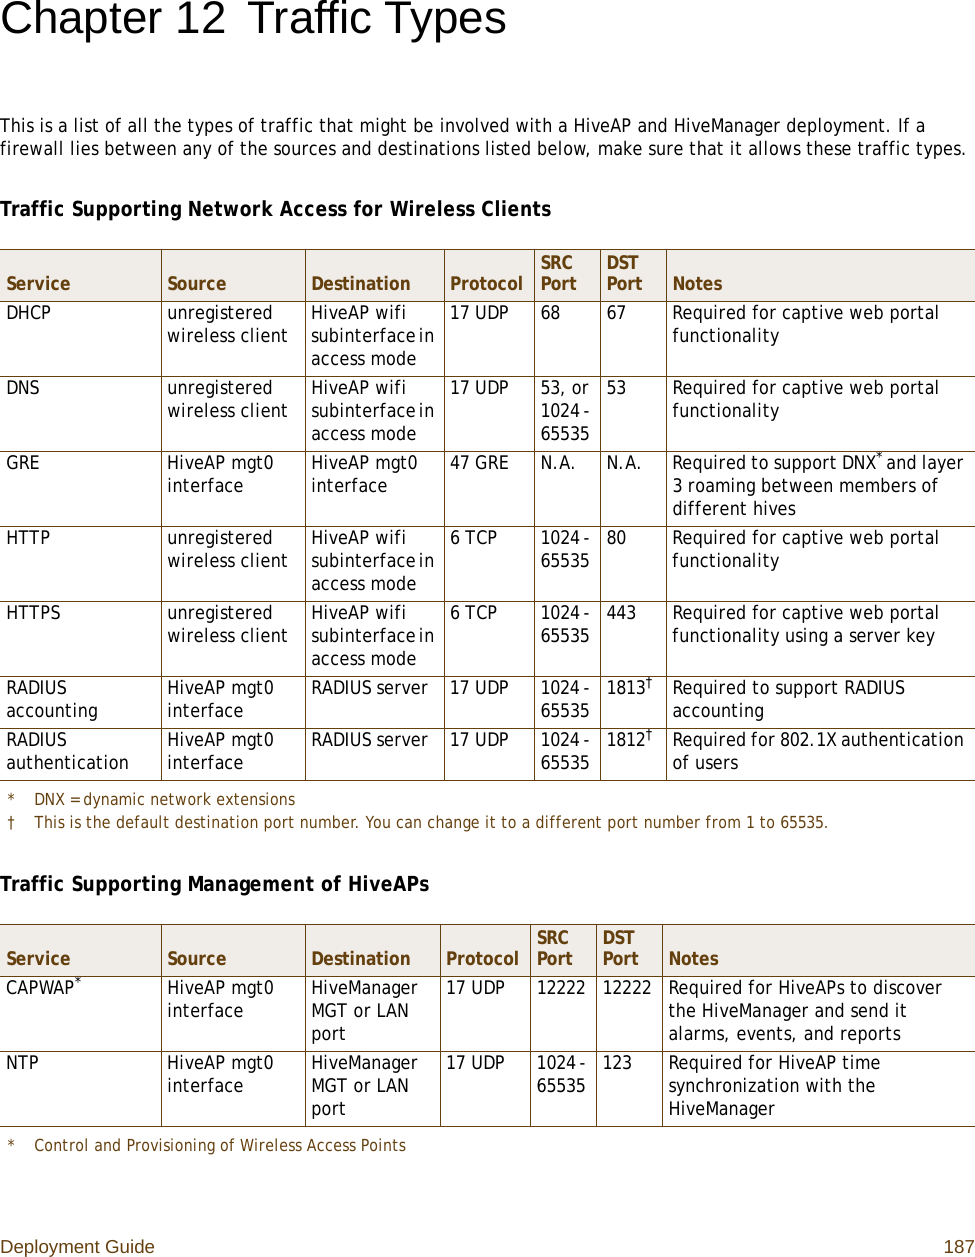 Deployment Guide 187Chapter 12 Traffic TypesThis is a list of all the types of traffic that might be involved with a HiveAP and HiveManager deployment. If a firewall lies between any of the sources and destinations listed below, make sure that it allows these traffic types.Traffic Supporting Network Access for Wireless ClientsTraffic Supporting Management of HiveAPsService Source Destination Protocol SRC Port DST Port NotesDHCP unregistered wireless client HiveAP wifi subinterface in access mode17 UDP6867Required for captive web portal functionalityDNS unregistered wireless client HiveAP wifi subinterface in access mode17 UDP 53, or 1024 - 6553553 Required for captive web portal functionalityGRE HiveAP mgt0 interface HiveAP mgt0 interface 47 GRE N.A. N.A. Required to support DNX* and layer 3 roaming between members of different hives* DNX = dynamic network extensionsHTTP unregistered wireless client HiveAP wifi subinterface in access mode6 TCP 1024 - 65535 80 Required for captive web portal functionalityHTTPS unregistered wireless client HiveAP wifi subinterface in access mode6 TCP 1024 - 65535 443 Required for captive web portal functionality using a server keyRADIUS accounting HiveAP mgt0 interface RADIUS server 17 UDP 1024 - 65535 1813†Required to support RADIUS accountingRADIUS authentication HiveAP mgt0 interface RADIUS server 17 UDP 1024 - 65535 1812†† This is the default destination port number. You can change it to a different port number from 1 to 65535.Required for 802.1X authentication of users Service Source Destination Protocol SRC Port DST Port NotesCAPWAP** Control and Provisioning of Wireless Access PointsHiveAP mgt0 interface HiveManager MGT or LAN port17 UDP 12222 12222 Required for HiveAPs to discover the HiveManager and send it alarms, events, and reportsNTP HiveAP mgt0 interface HiveManager MGT or LAN port17 UDP 1024 - 65535 123 Required for HiveAP time synchronization with the HiveManager